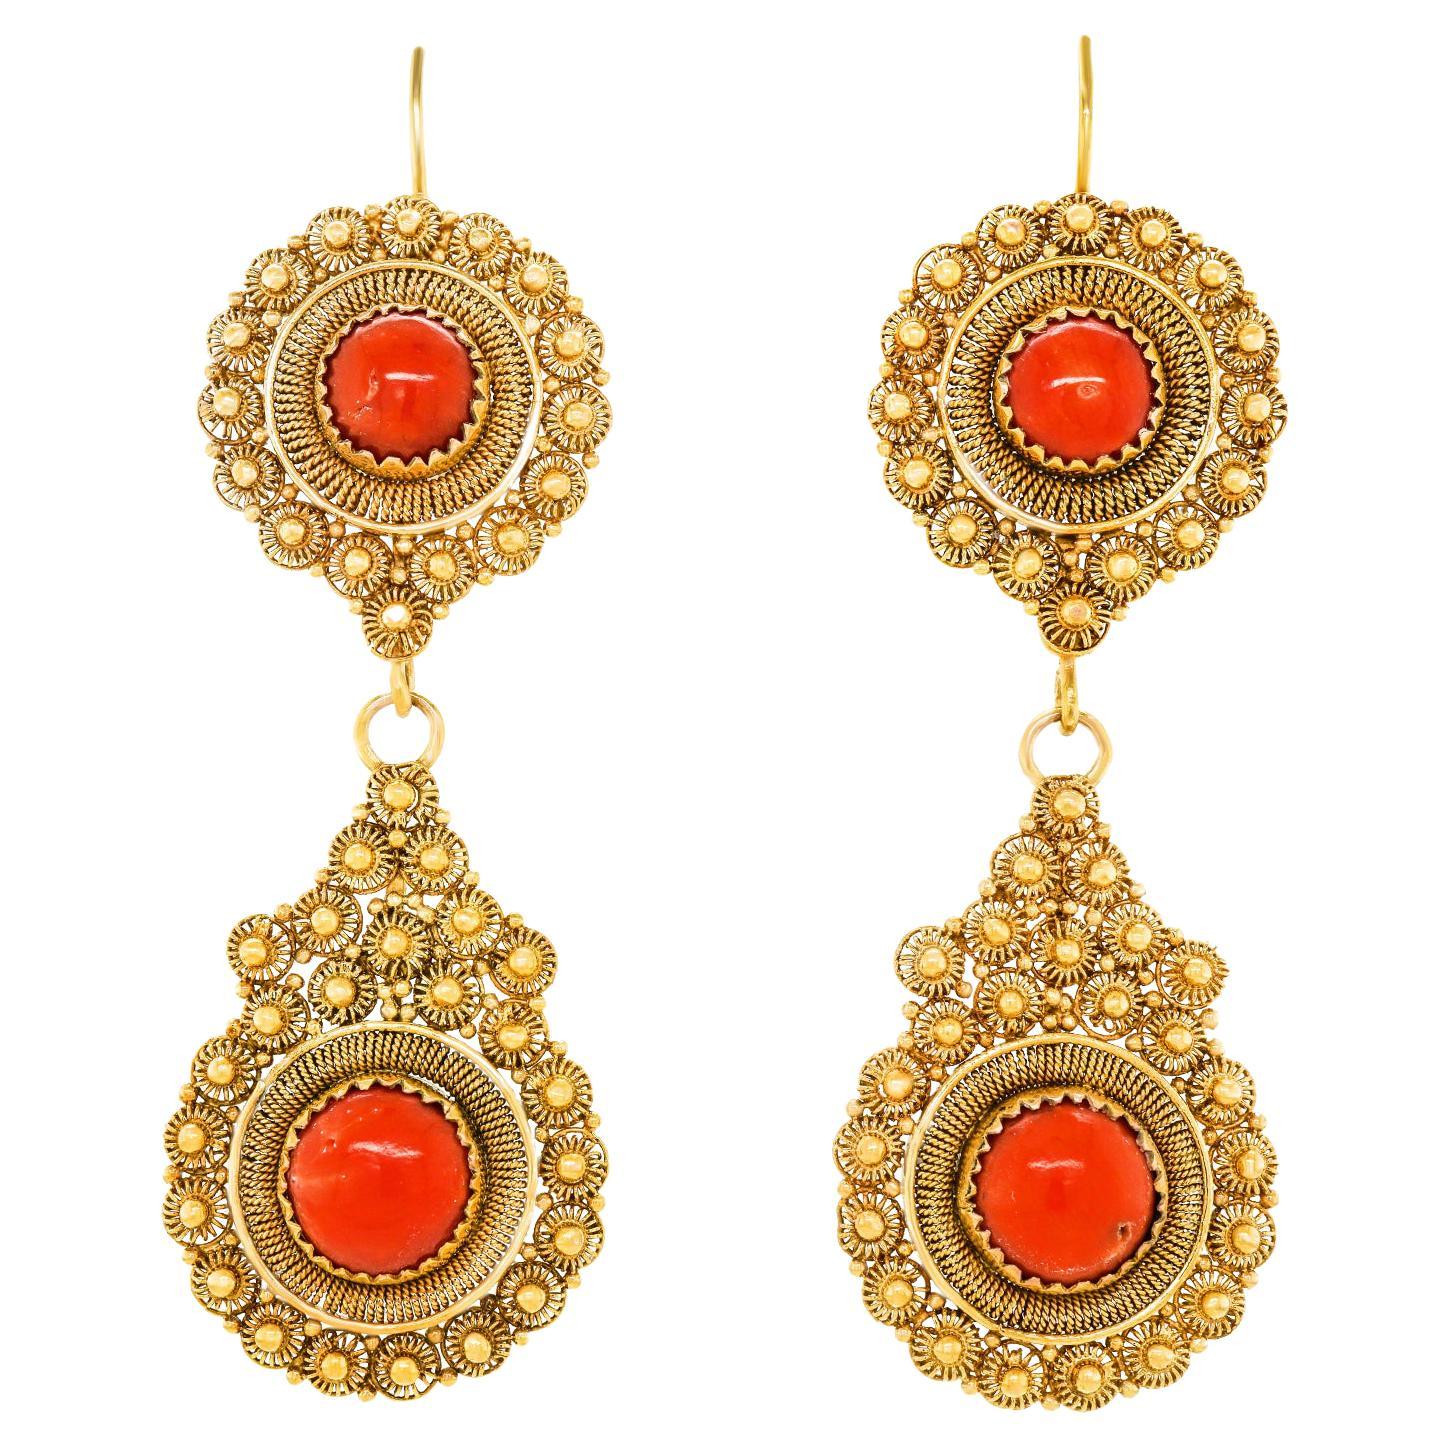 Antique Coral-Set Gold Earrings